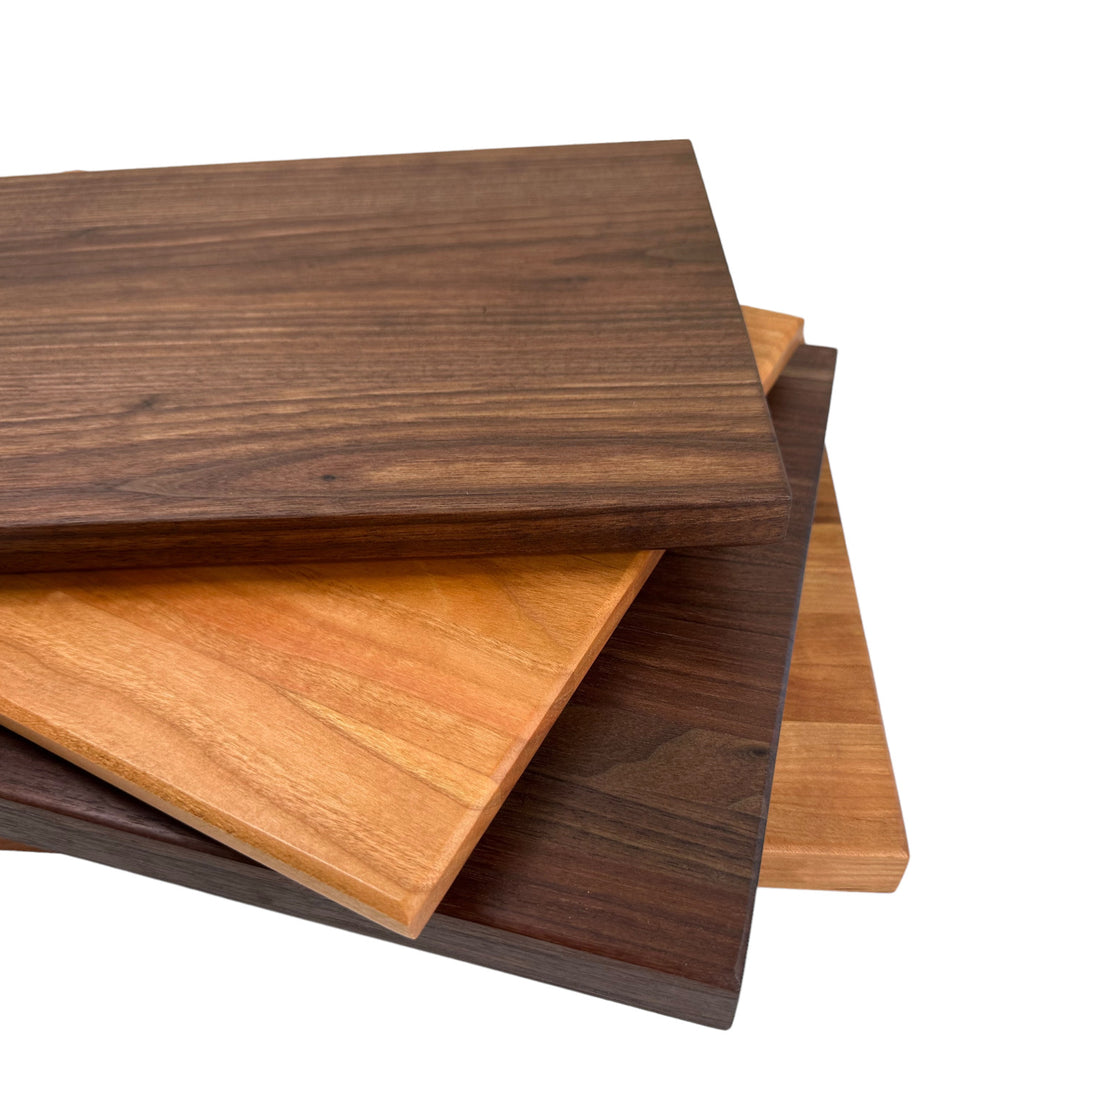 The Expert's Guide to Choosing the Best Wood for Your Cutting Board